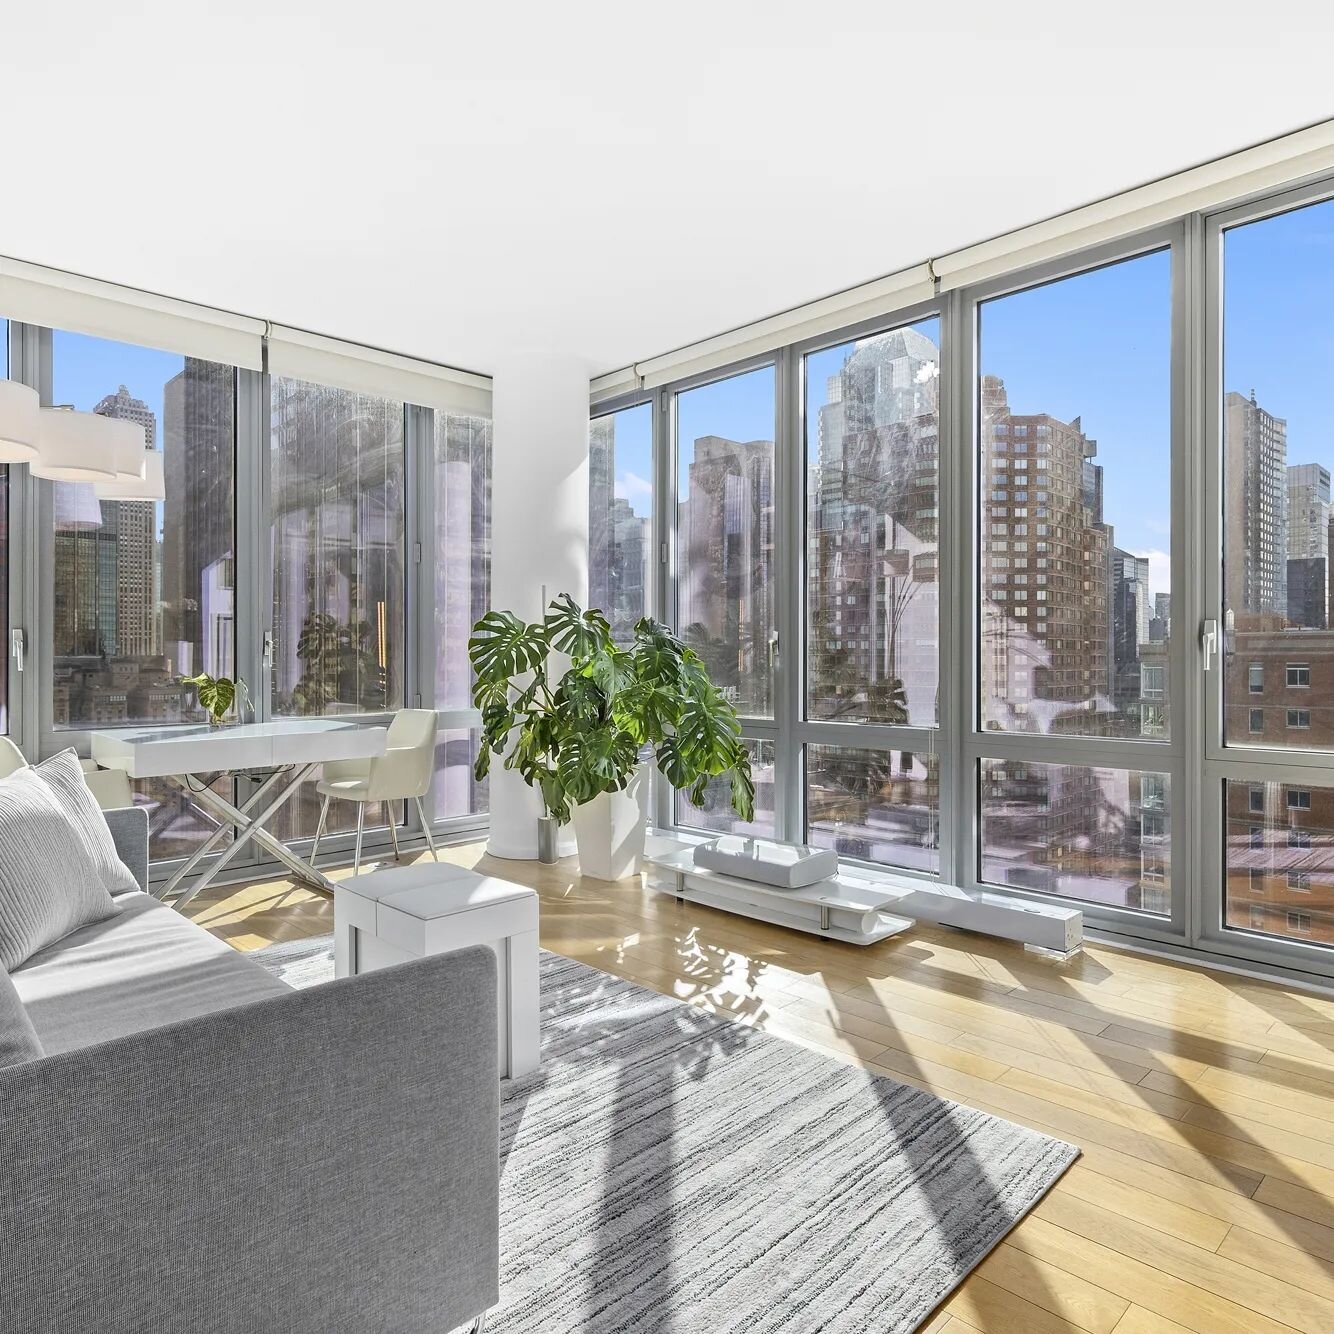 What a view! Just listed a huge 1 bed 1.5 bath for rent in Midtown West - 310 West 52nd Street 25A. Asking 5750/month No Fee!